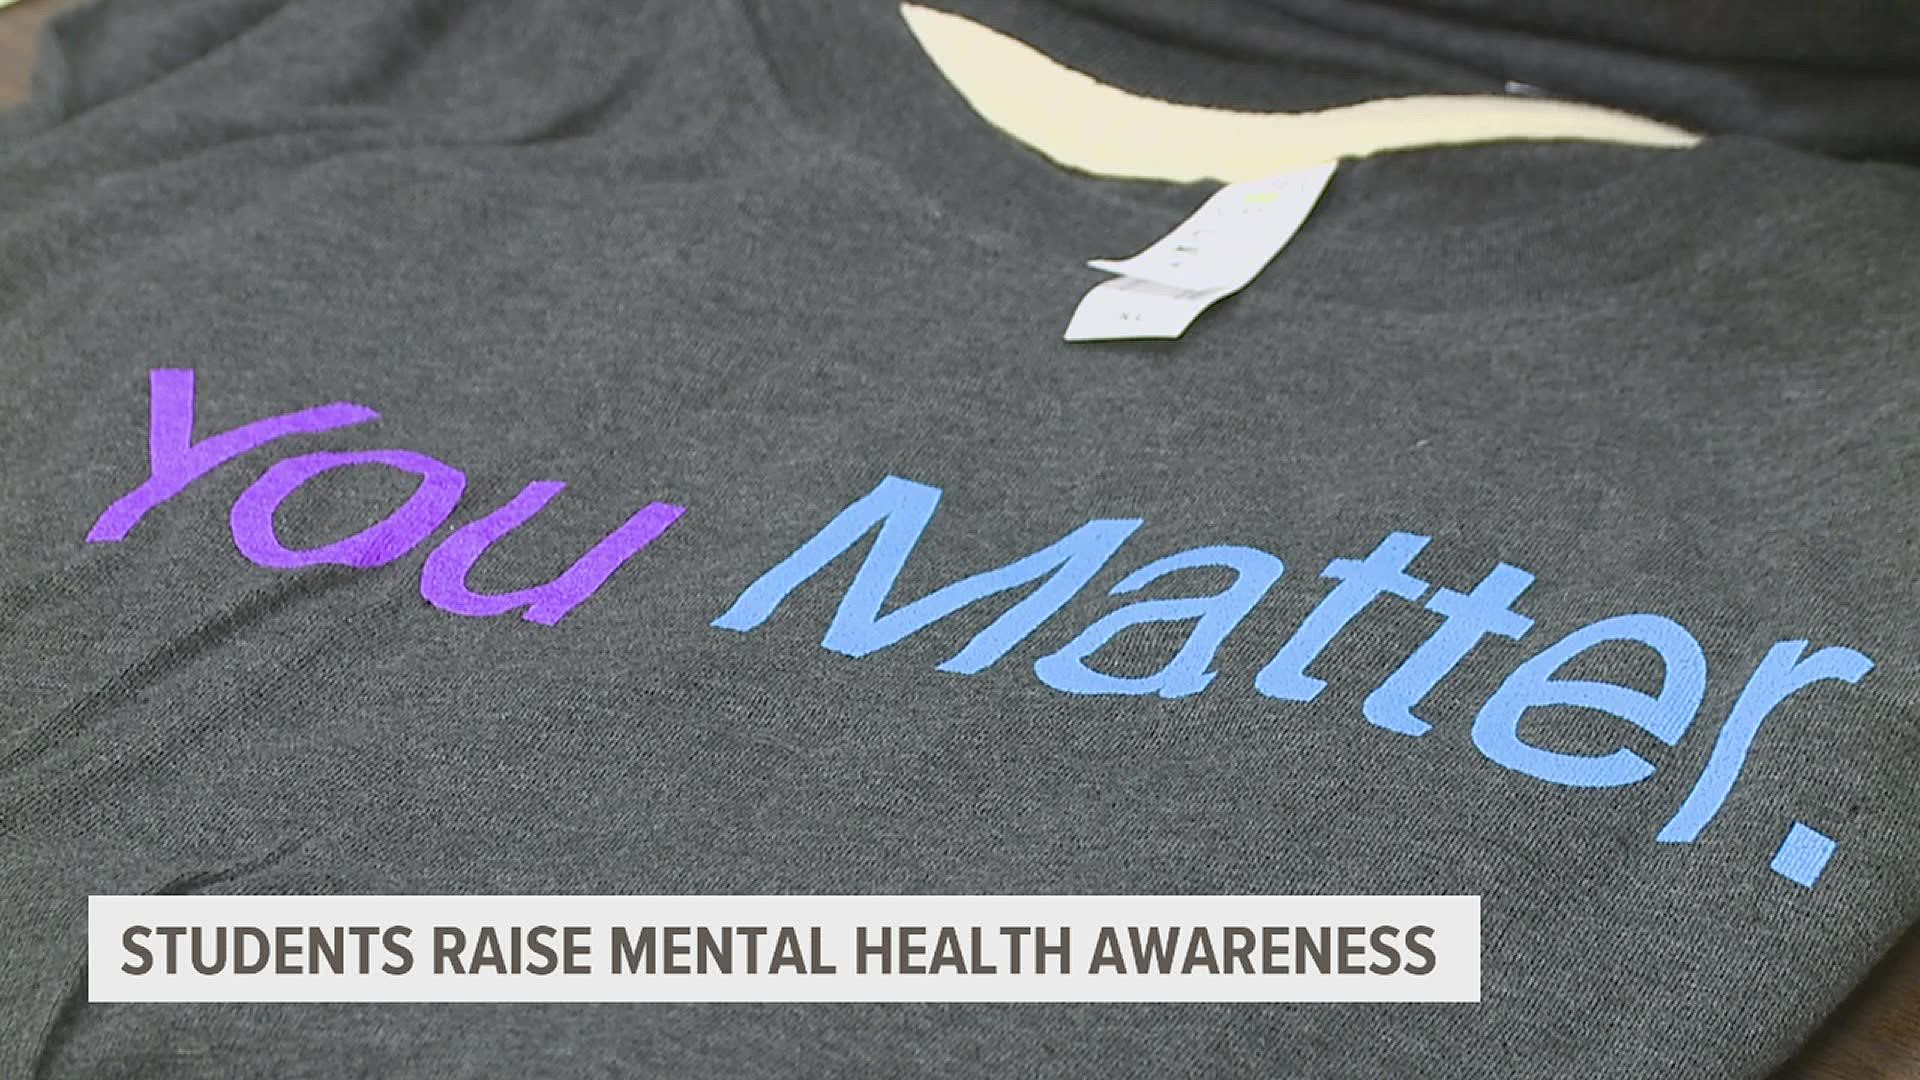 Money raised at the event will be split between the two districts to help counselors get the resources they need to provide mental health support.